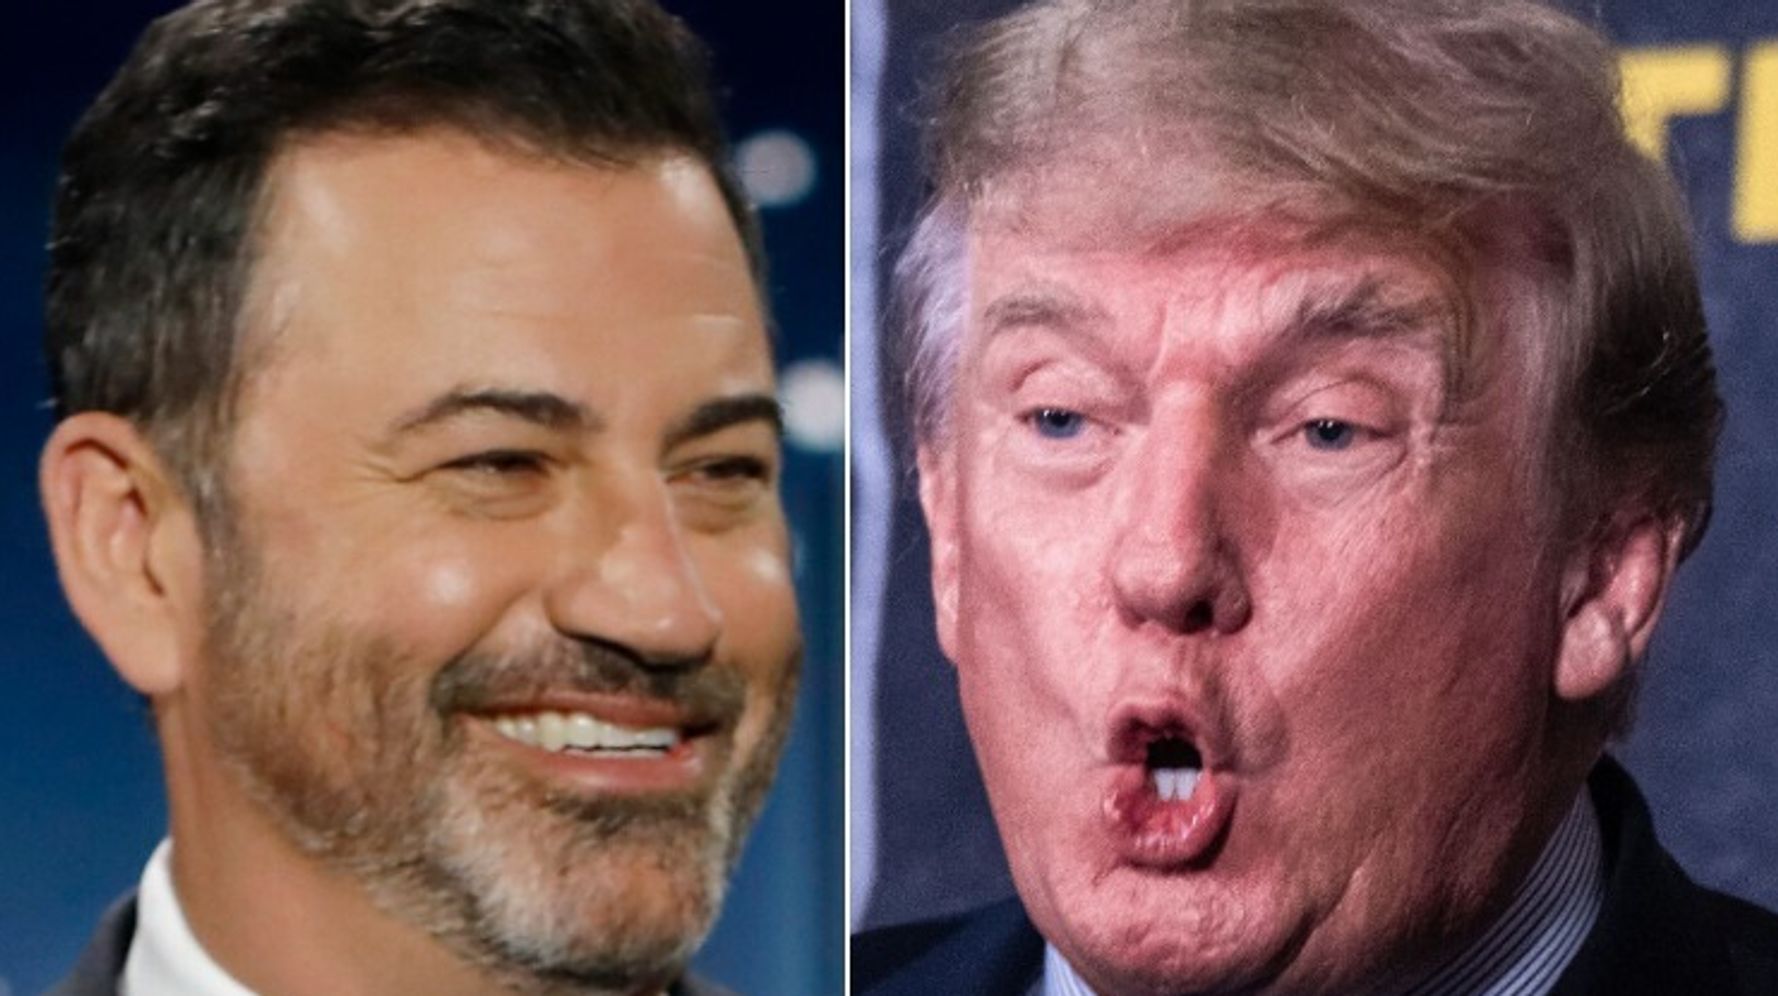 Jimmy Kimmel only needs 5 brutal words to sum up Trump and today’s Republicans